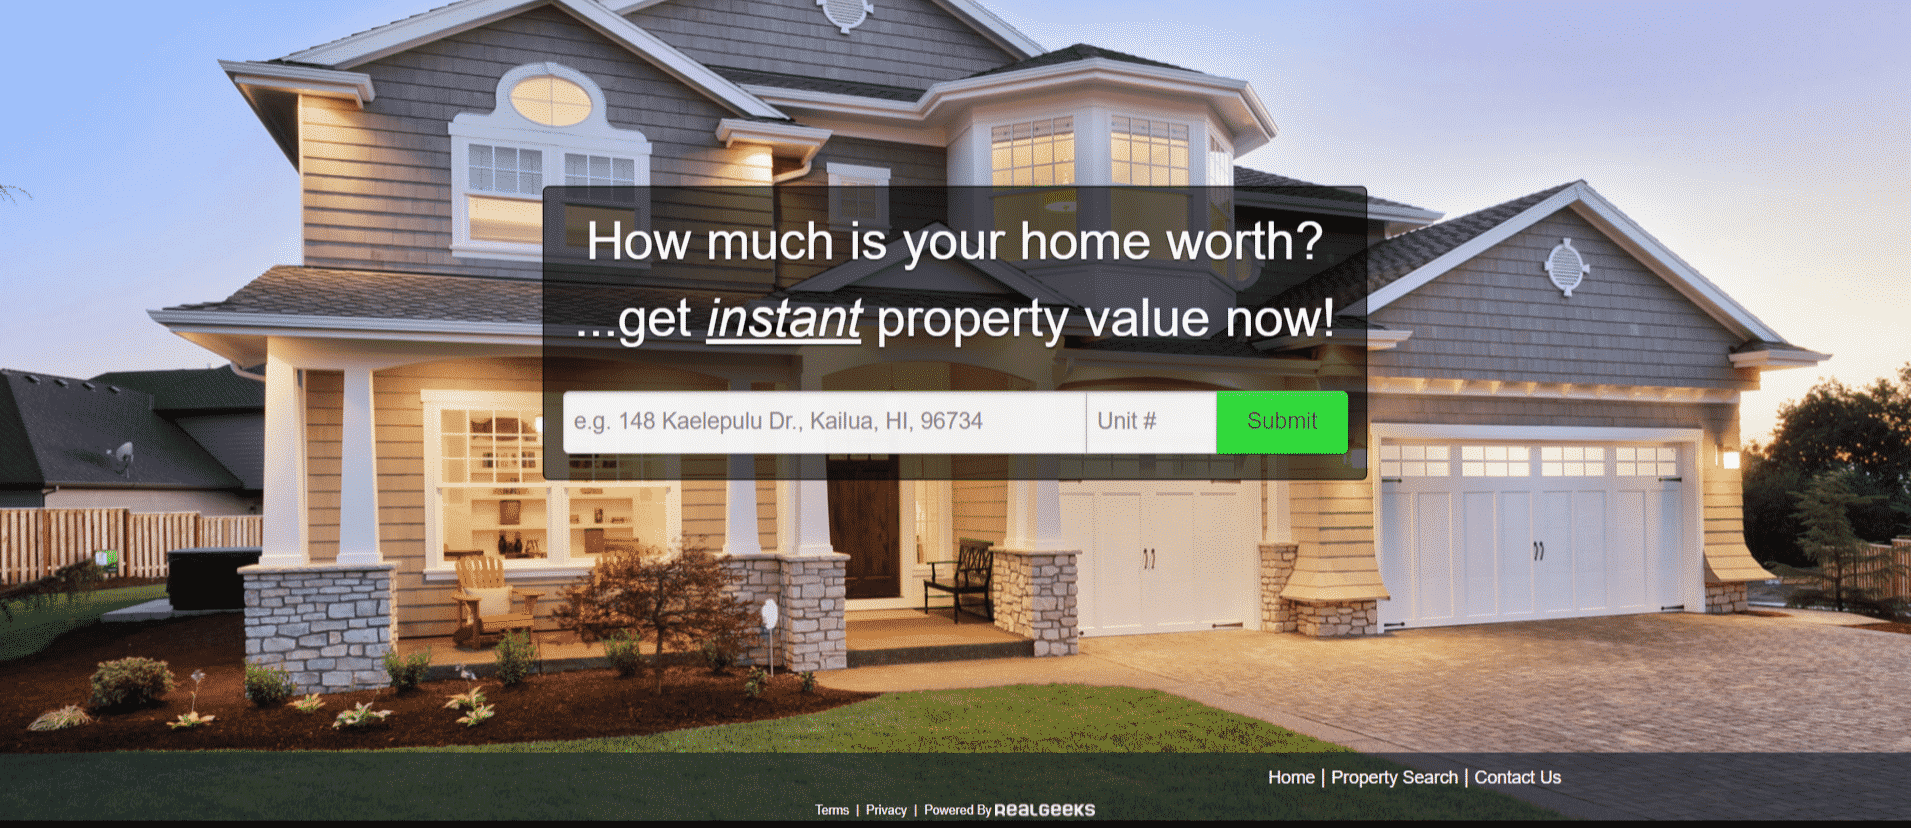 Real Geeks home valuation landing page